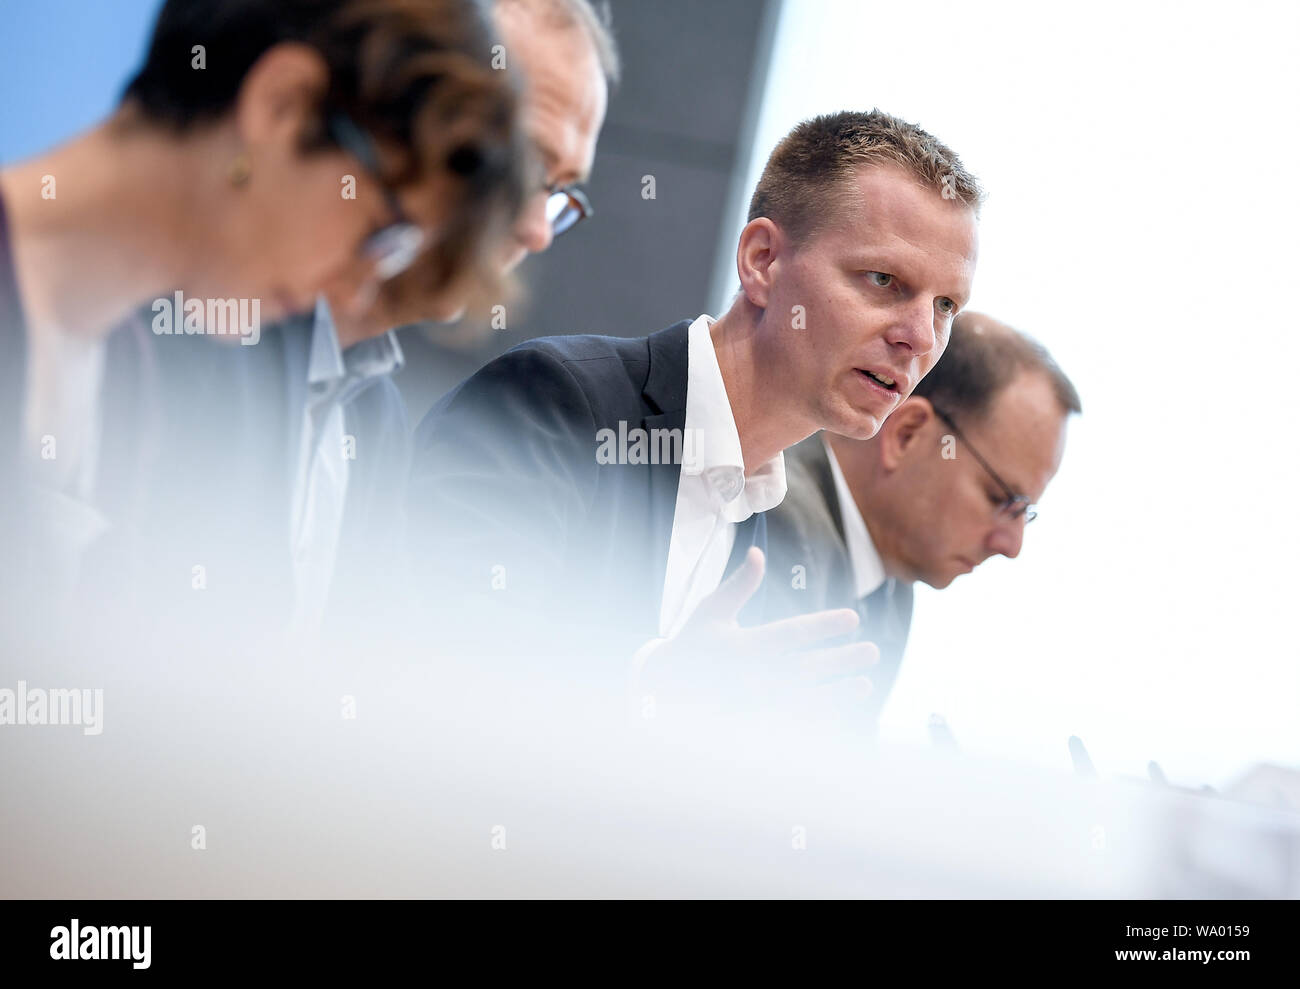 Berlin, Germany. 16th Aug, 2019. Antje von Broock (l-r), Deputy Federal Managing Director of BUND, Martin Kaiser, Managing Director of Greenpeace and Kai Niebert, President of the German Nature Conservation Association, speak at a press conference on the urgency of emergency measures in climate protection. Credit: Britta Pedersen/dpa-Zentralbild/ZB/dpa/Alamy Live News Stock Photo